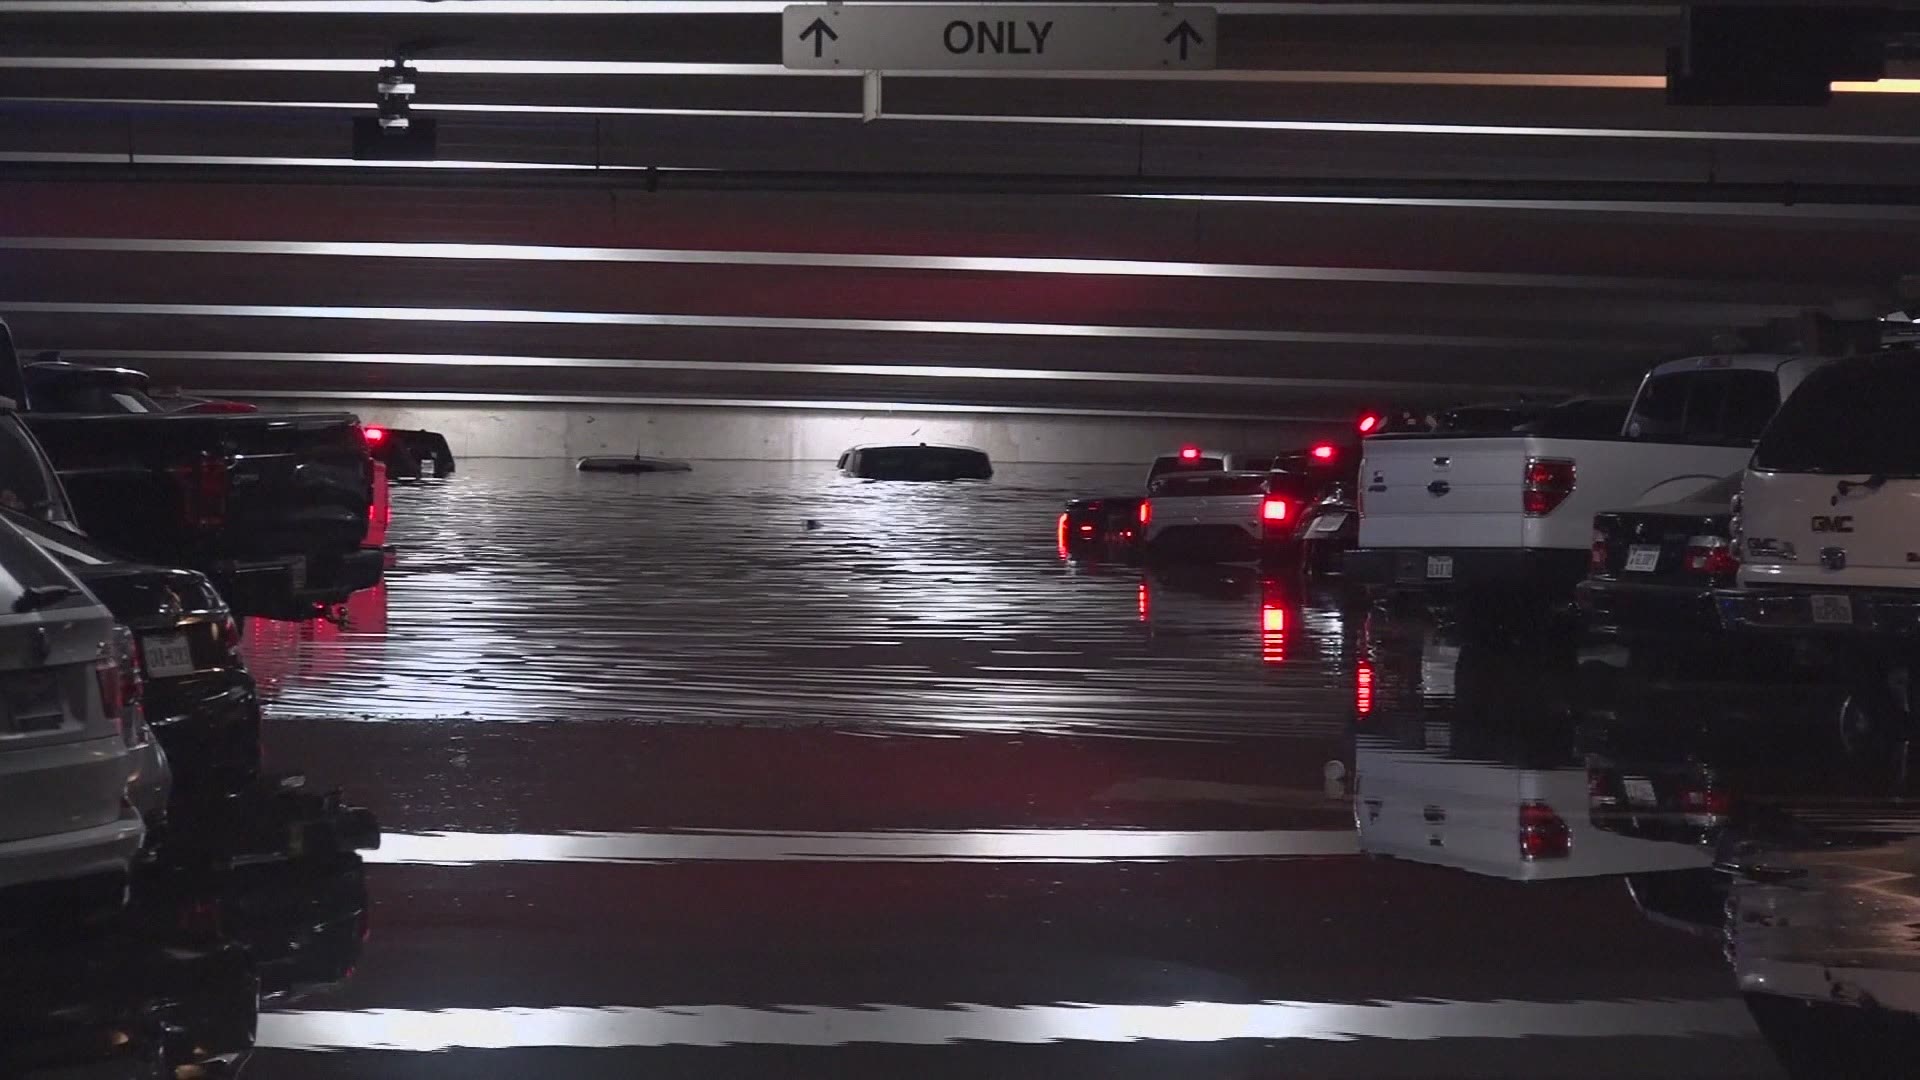 Dozens of vehicles parked at a Dallas airport are underwater after heavy rains moved across much of Texas and brought flash-flood warnings and high-water rescues.